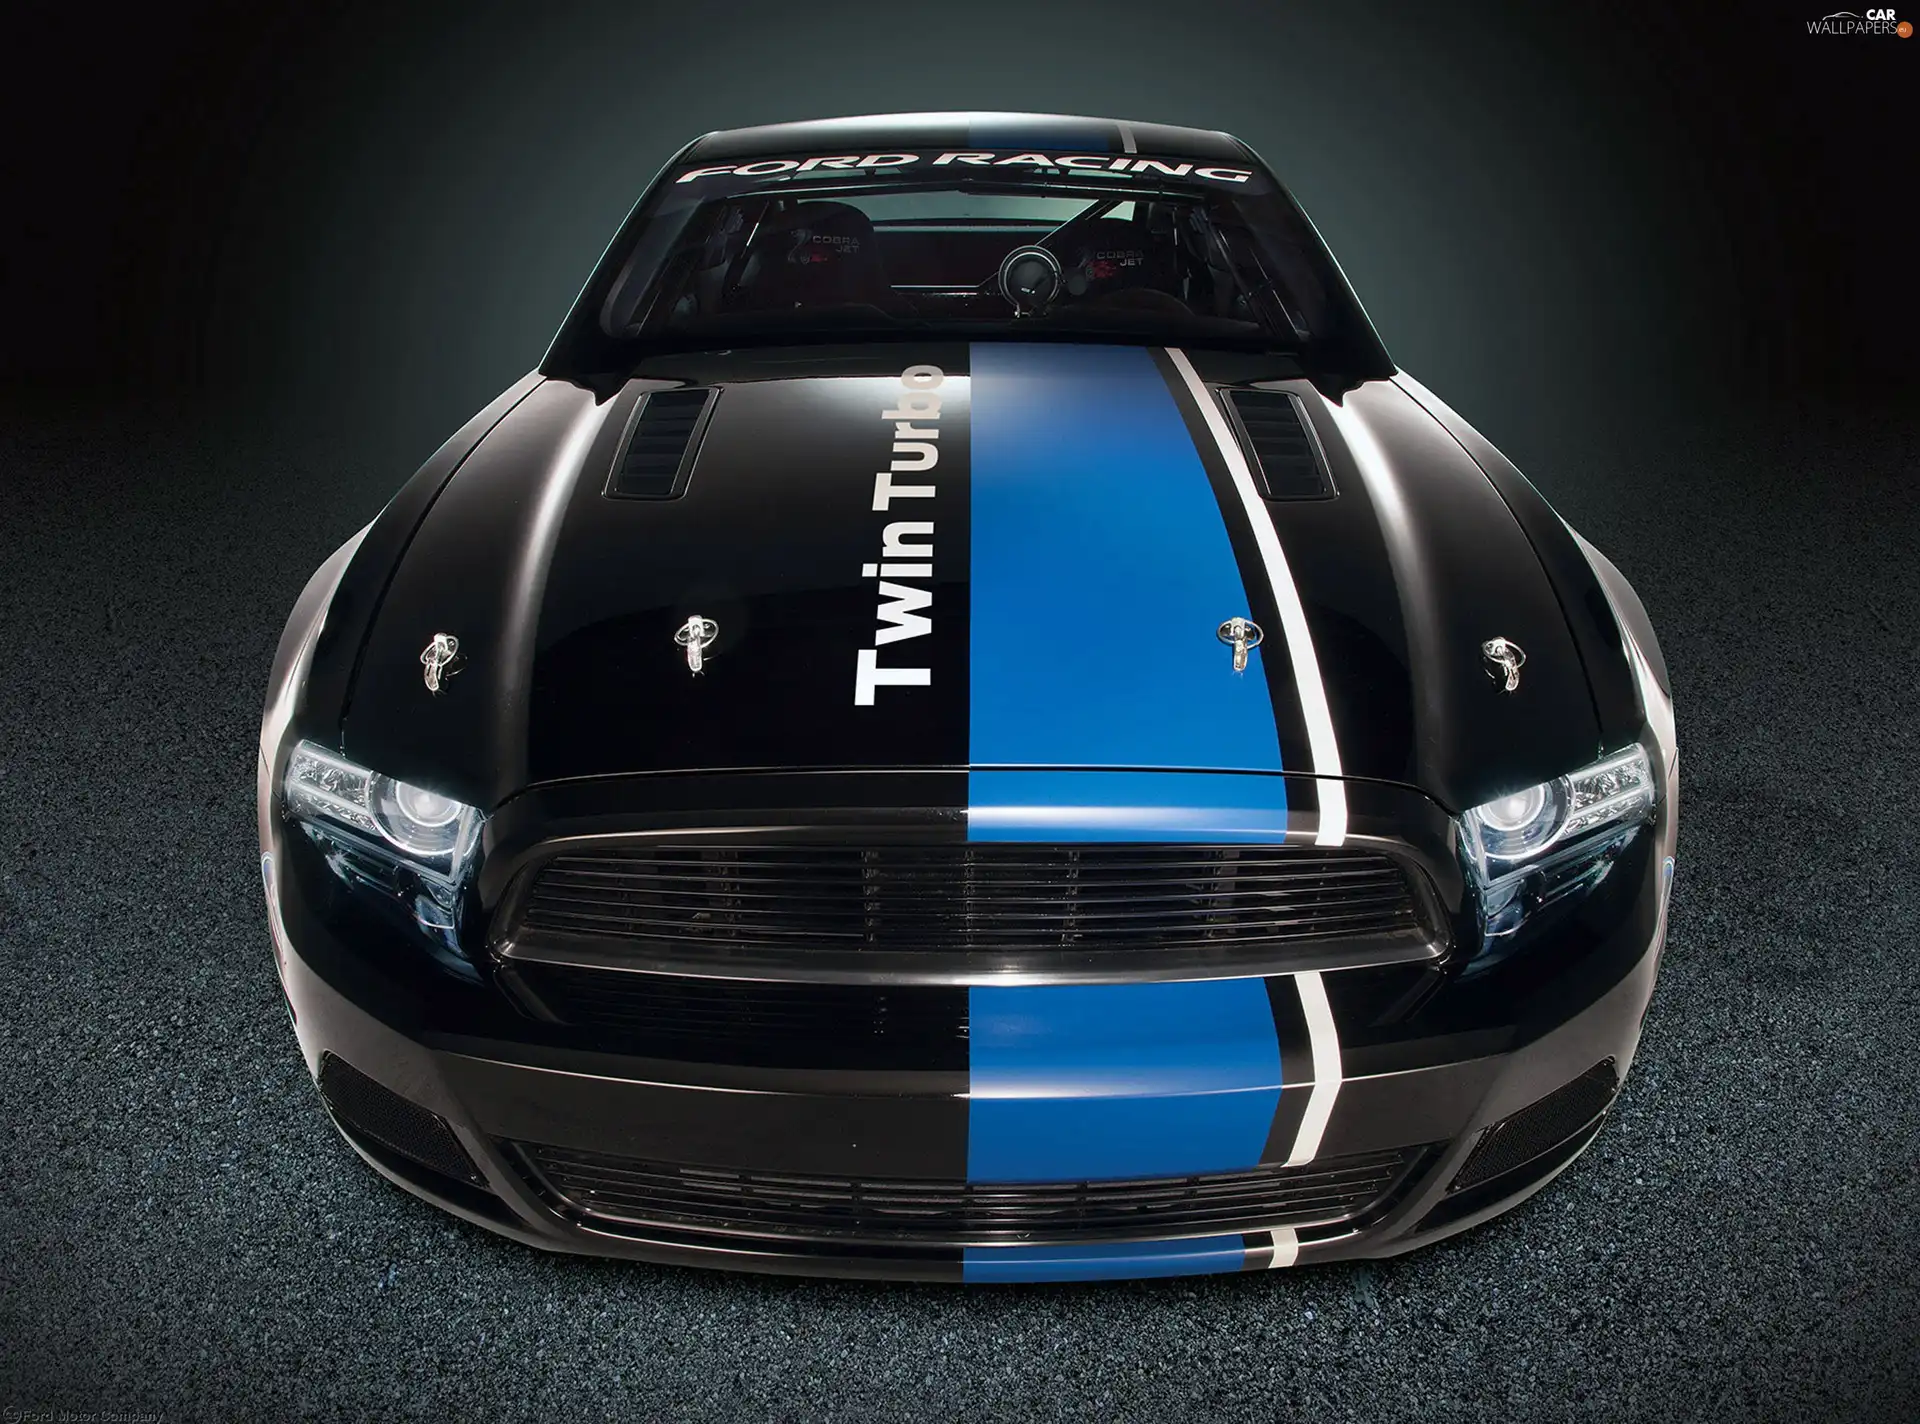 Ford Mustang, Twin-Turbo, Concept, Cobra Jet